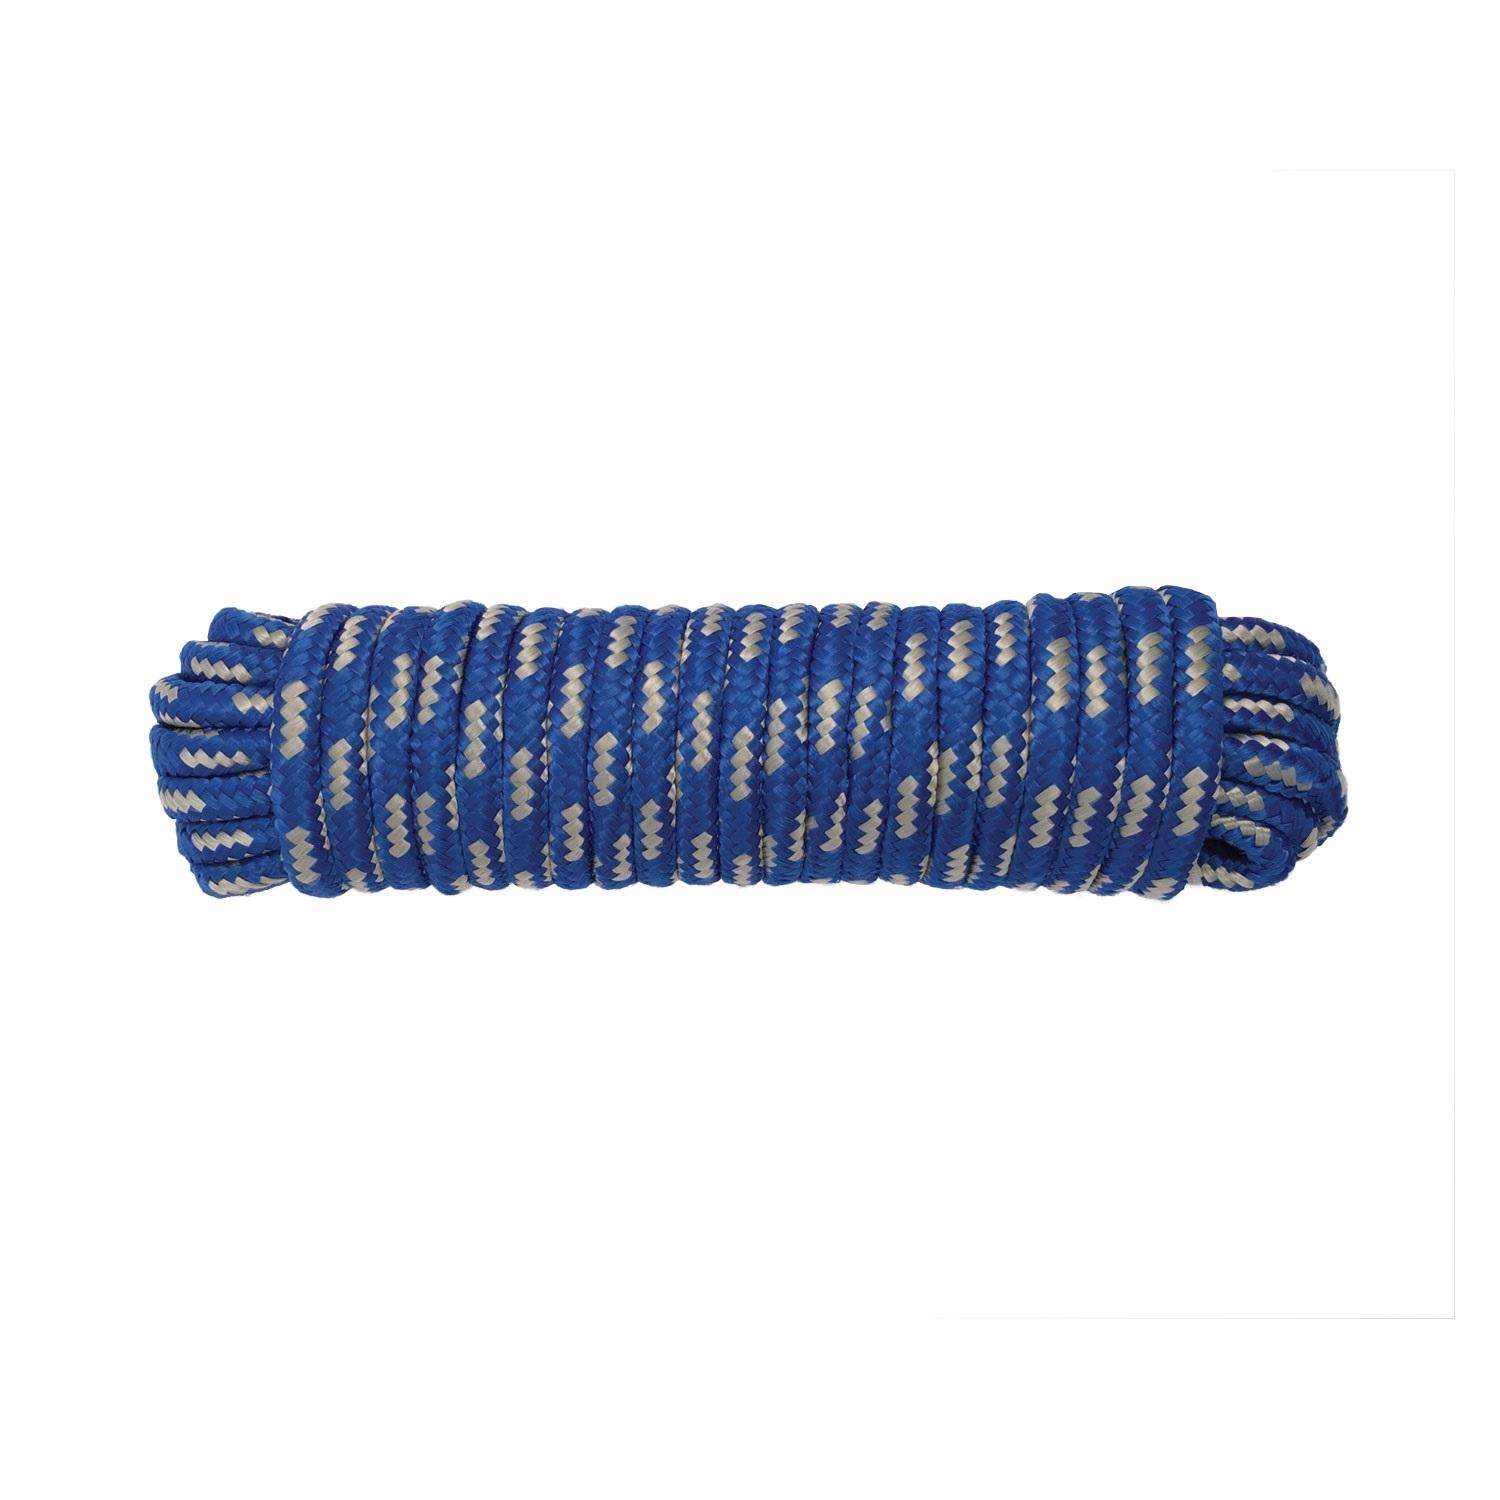 1/2 in. x 100 ft. Assorted Colors Diamond Braid Polypropylene Rope (1 color  per each order)